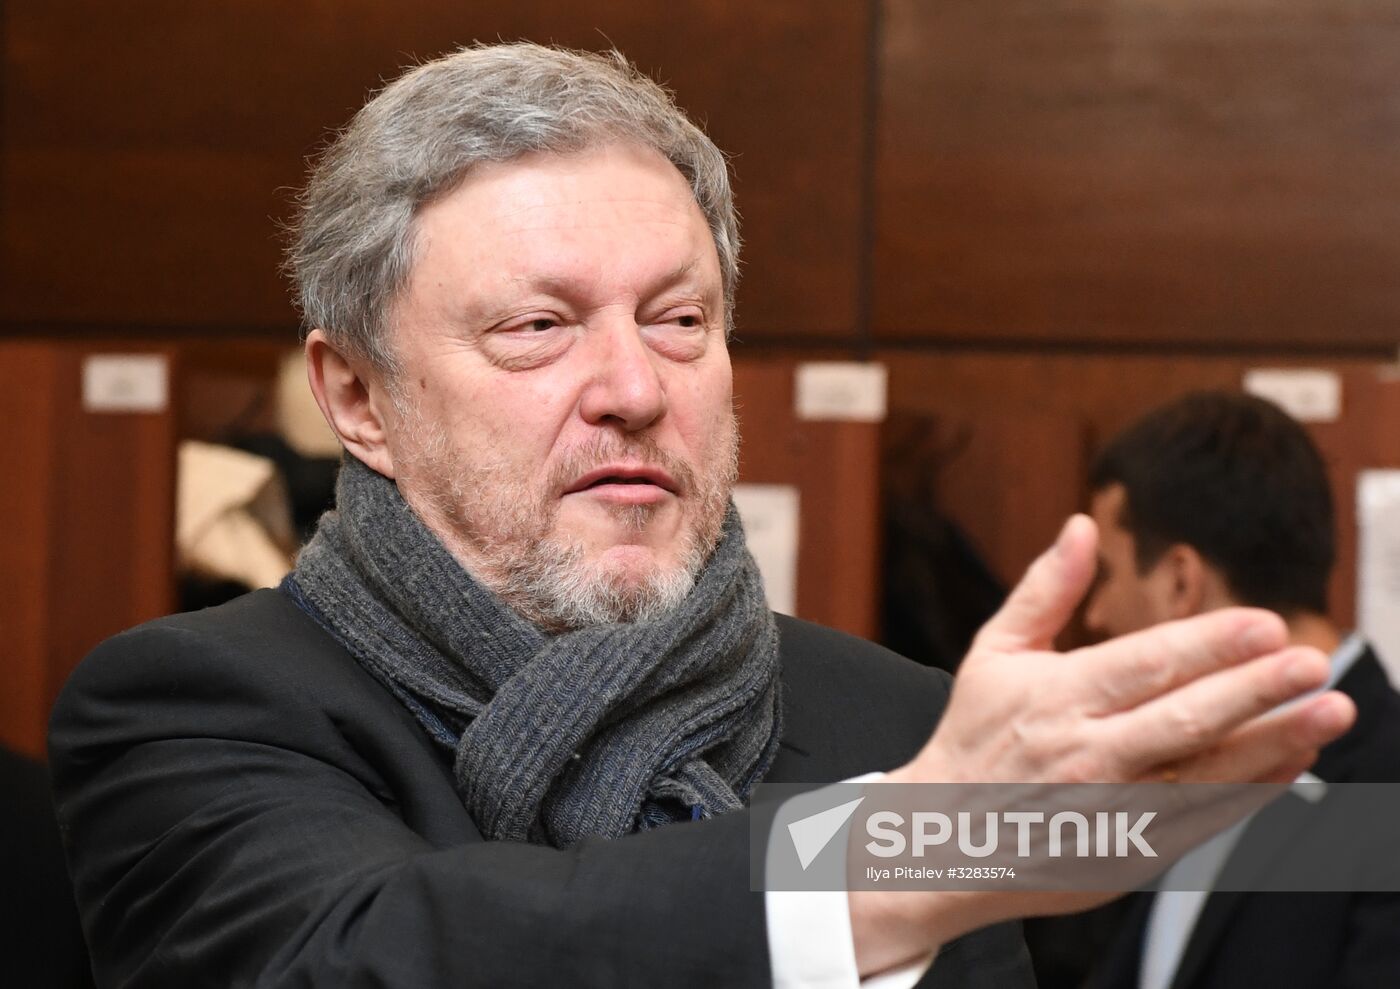 Submitting signatures in support of Grigory Yavlinsky's registration as presidential candidate